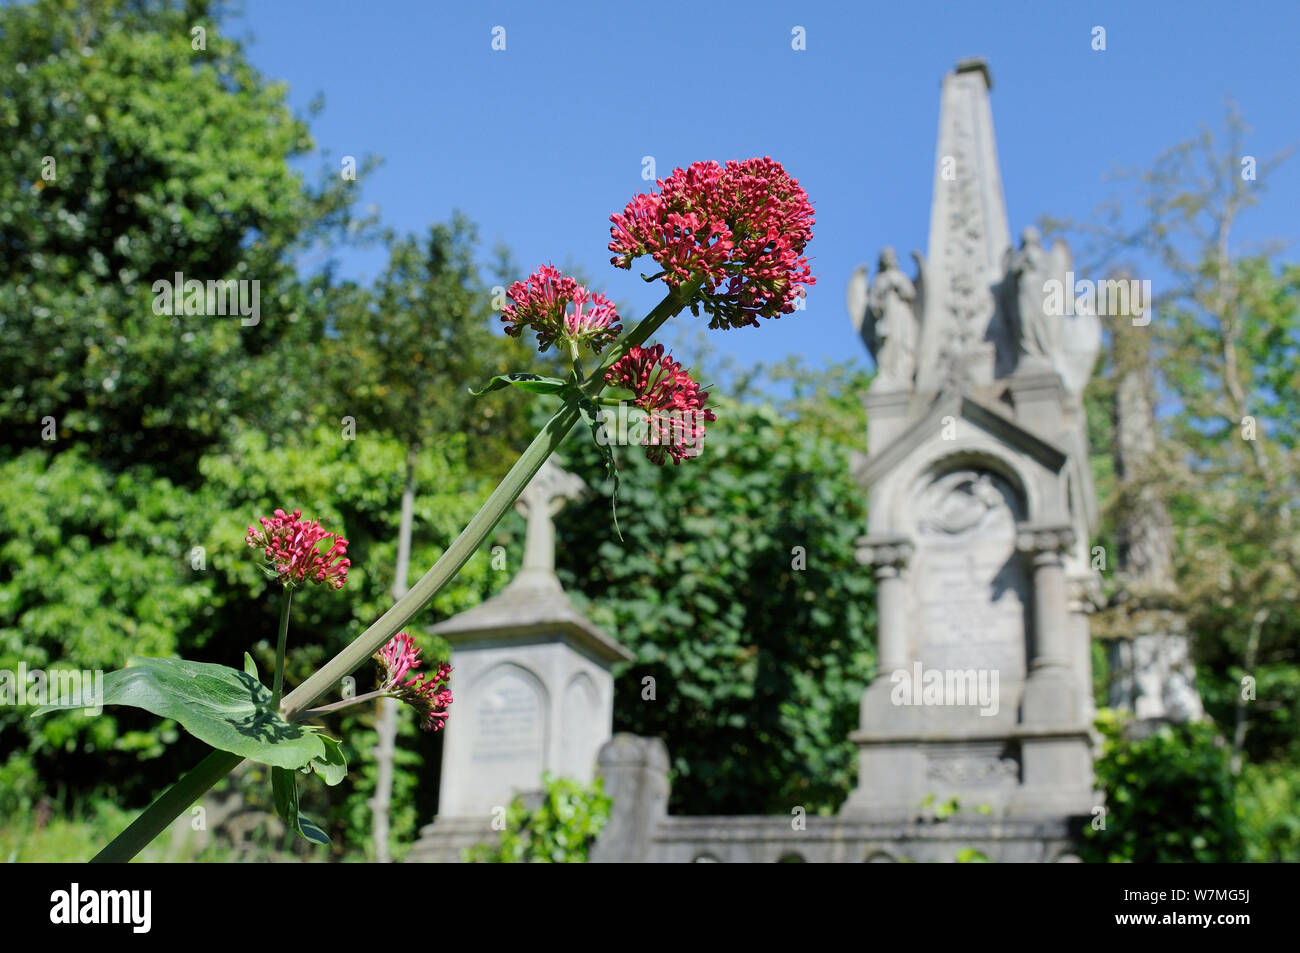 Red Valerian (Centranthus ruber) flowering near tombs and crosses in Arnos Vale Cemetery, Bristol, UK, May. Stock Photo